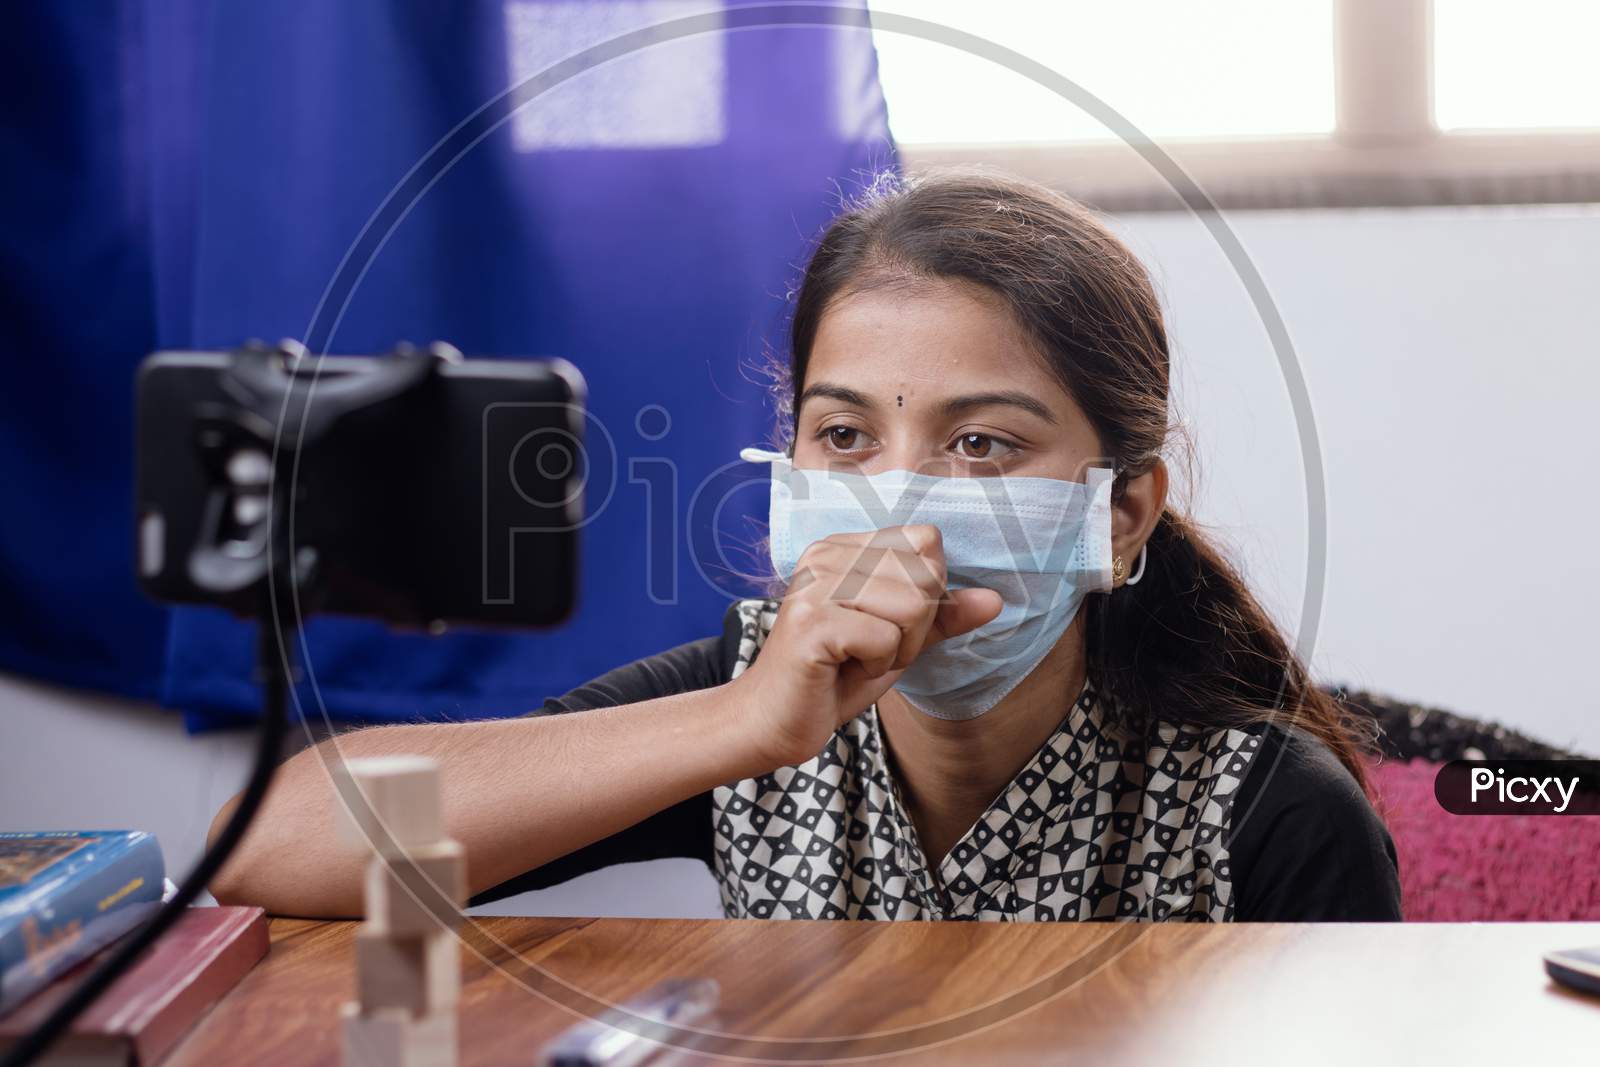 Concept Of a Patient consulting a Doctor in Video call during Covid-19 Or Coronavirus Pandemic LockDown.